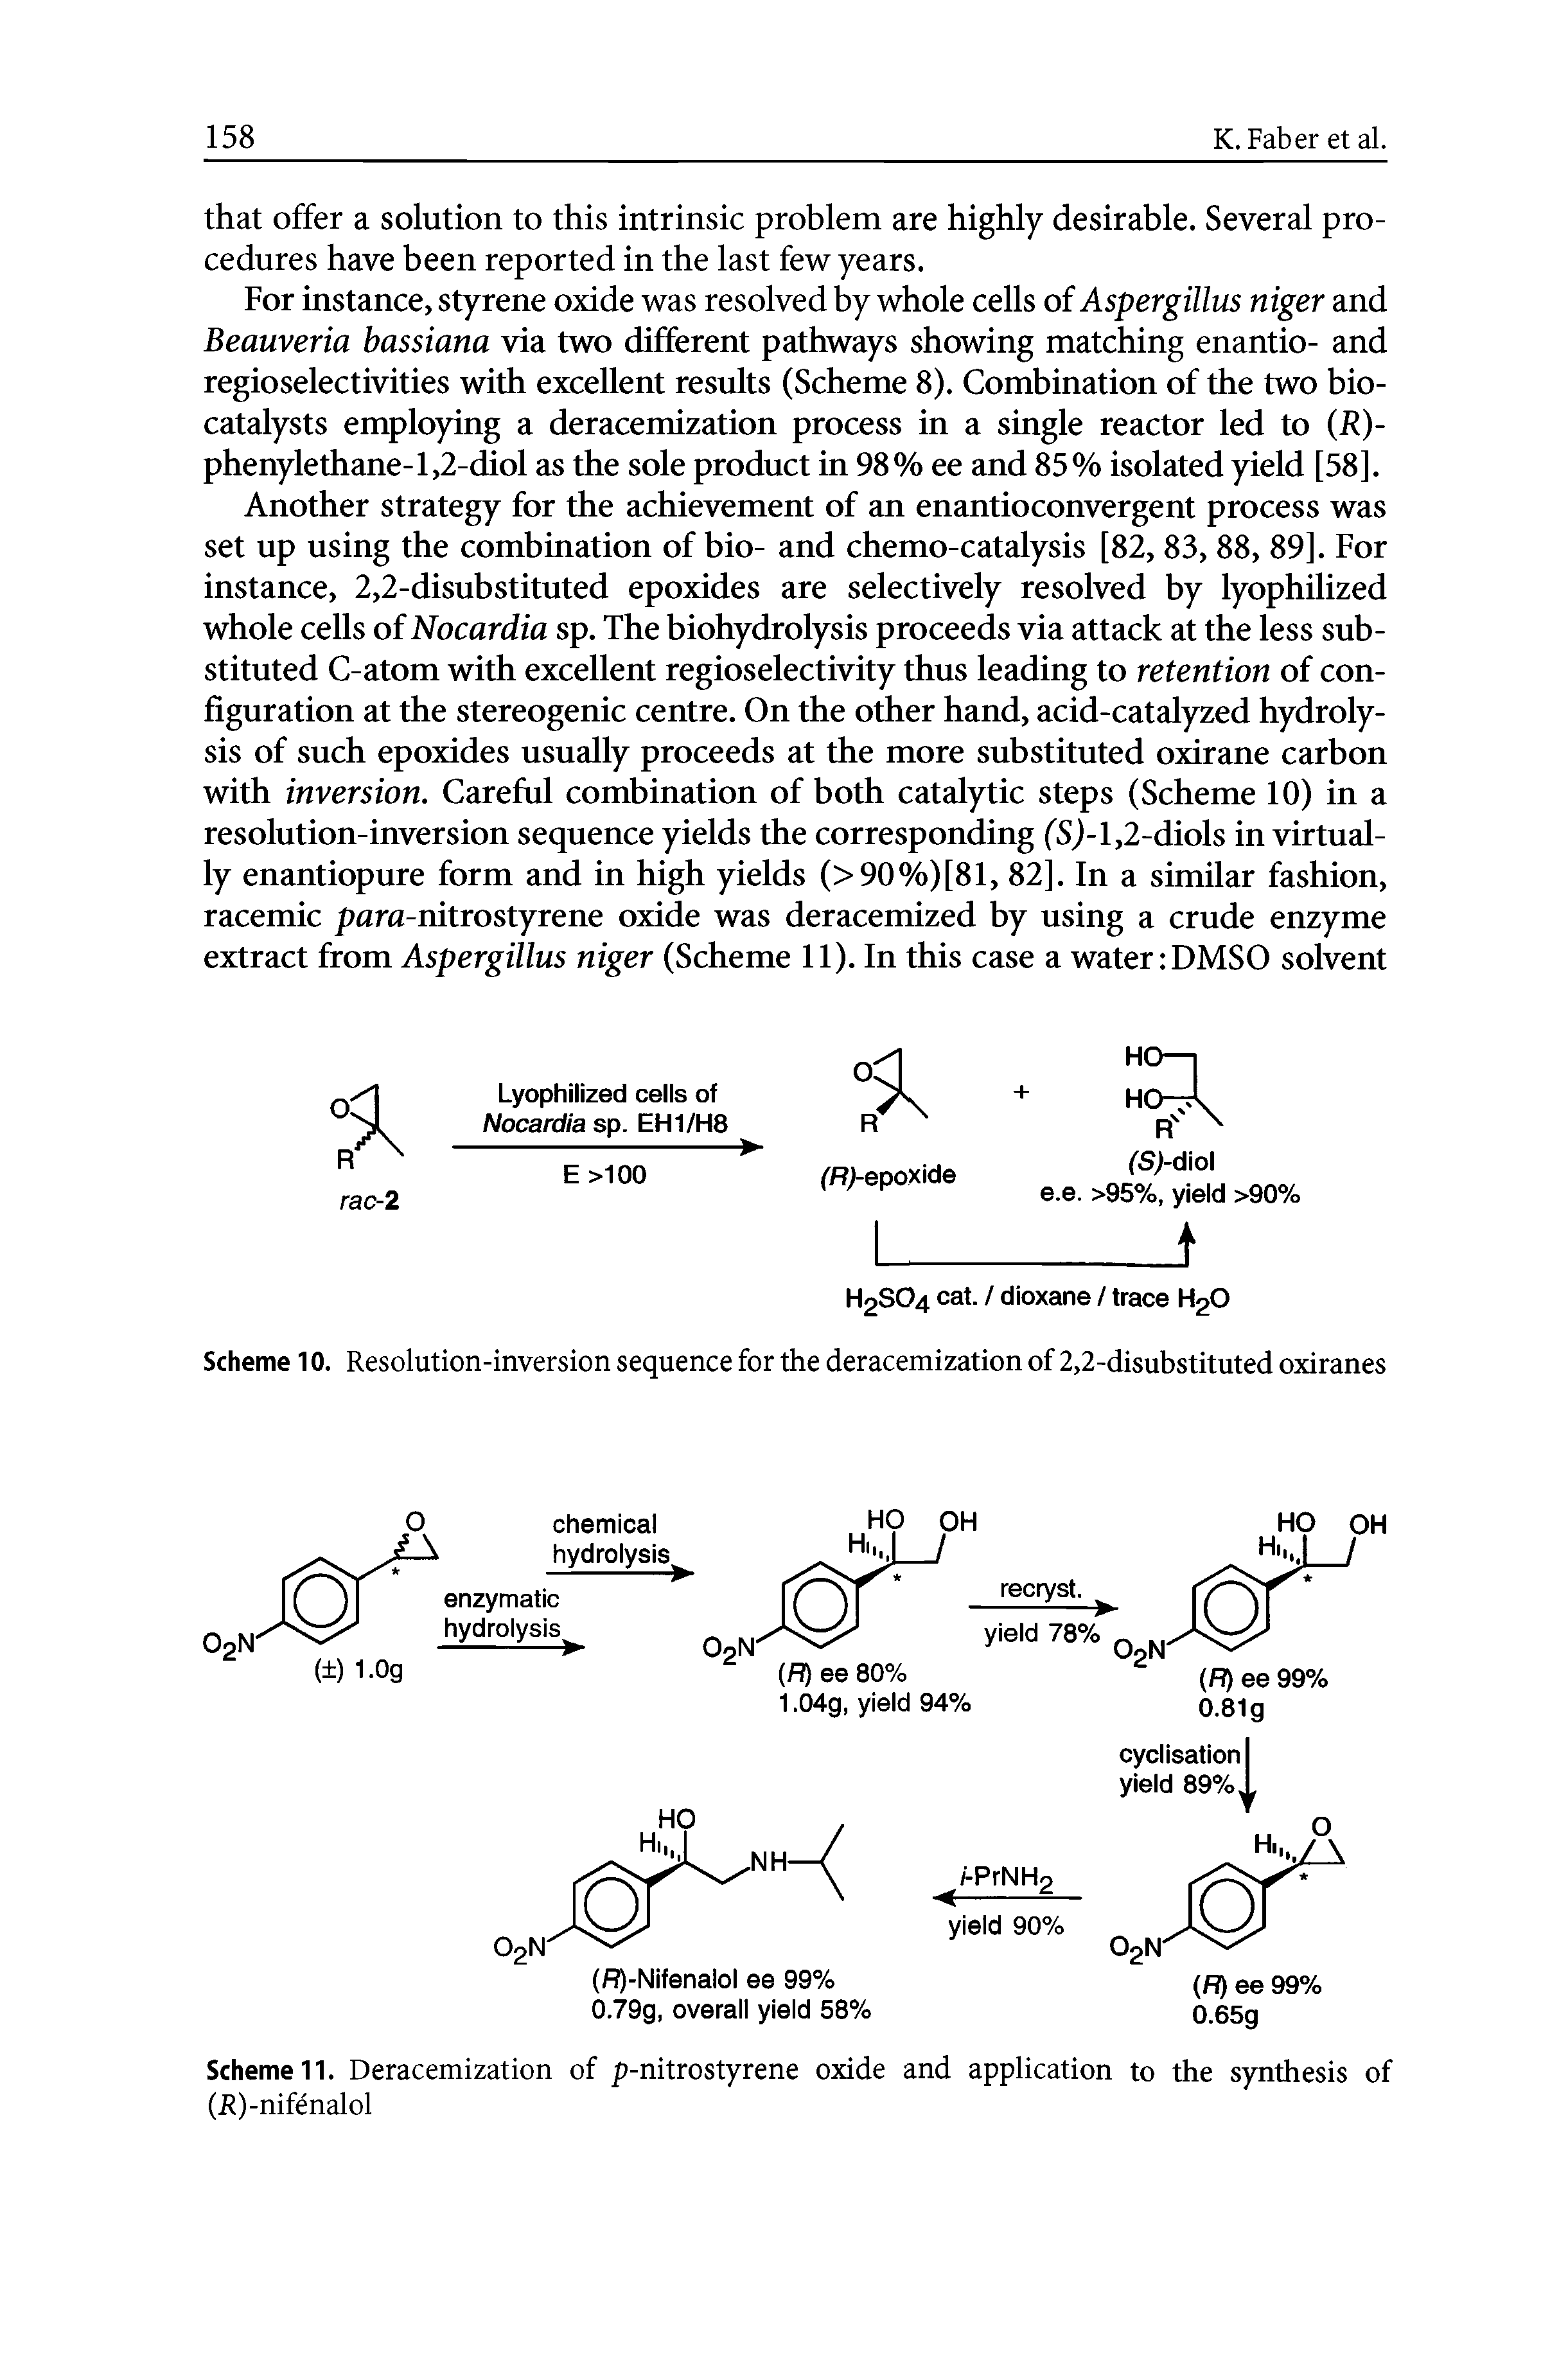 Scheme 10. Resolution-inversion sequence for the deracemization of 2,2-disubstituted oxiranes...